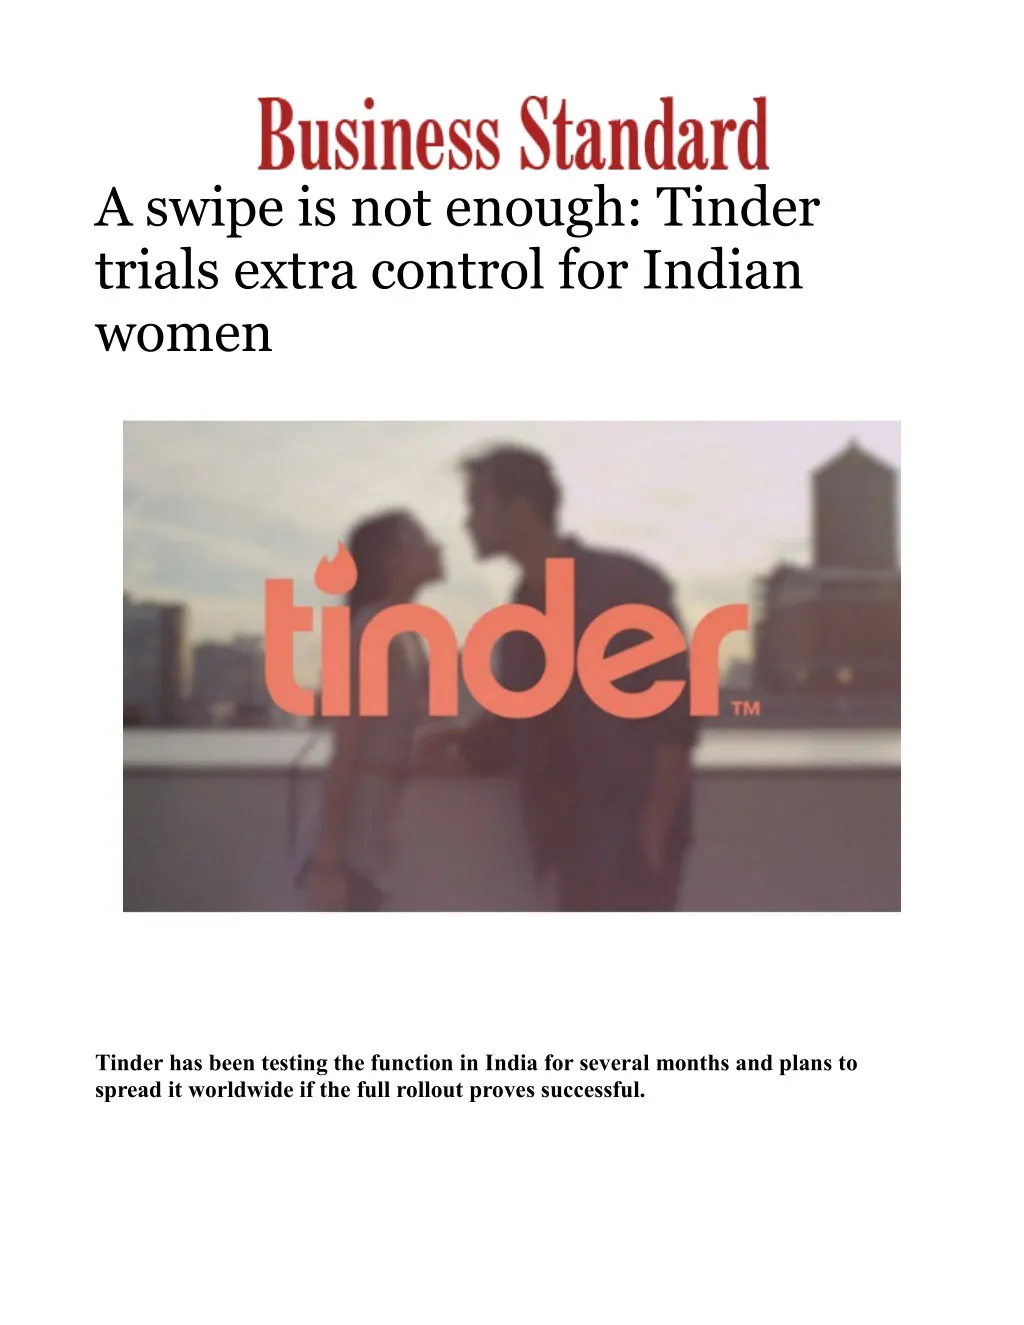 a swipe is not enough tinder trials extra control